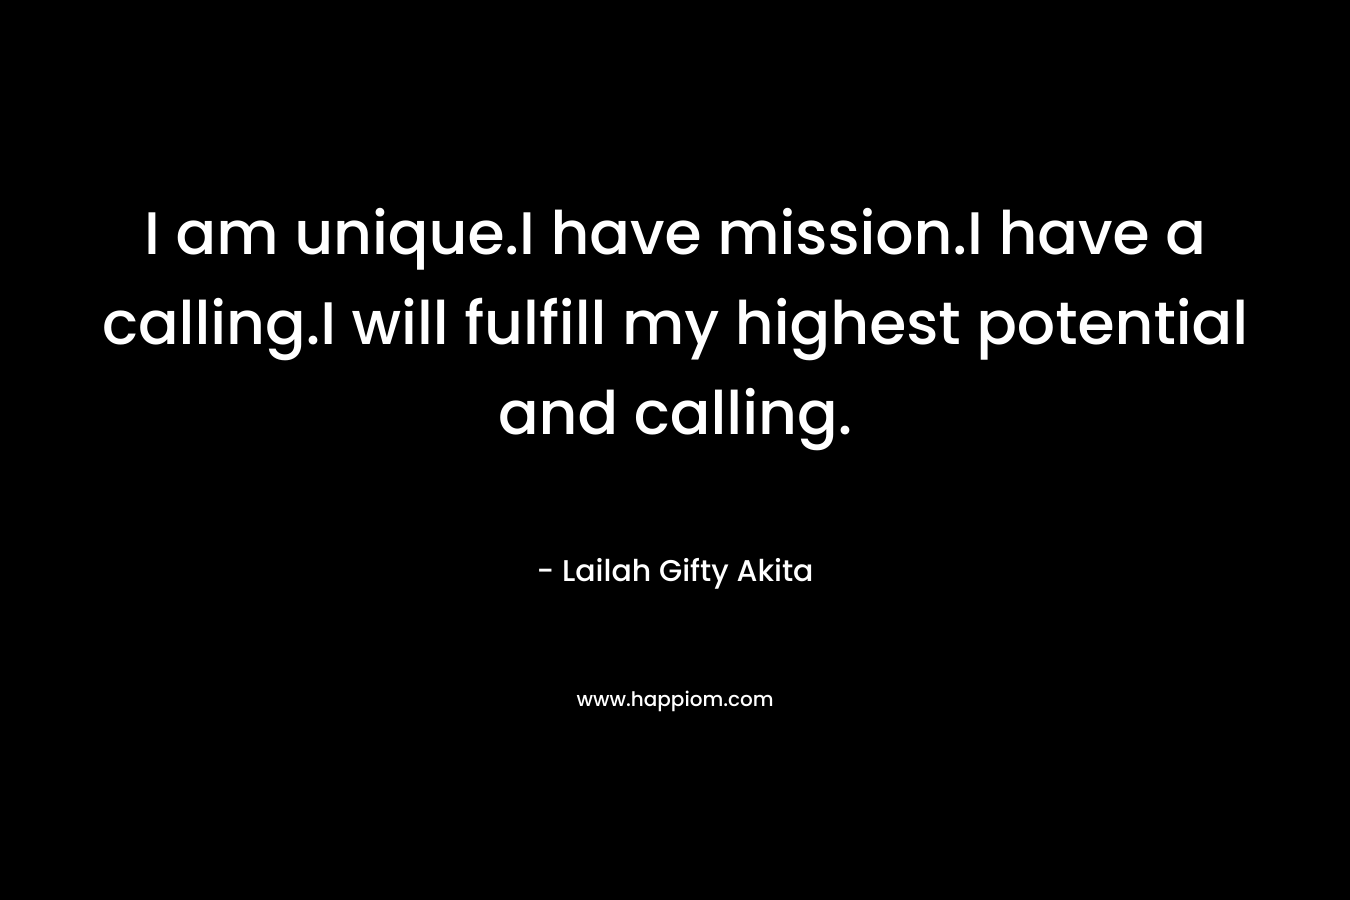 I am unique.I have mission.I have a calling.I will fulfill my highest potential and calling.